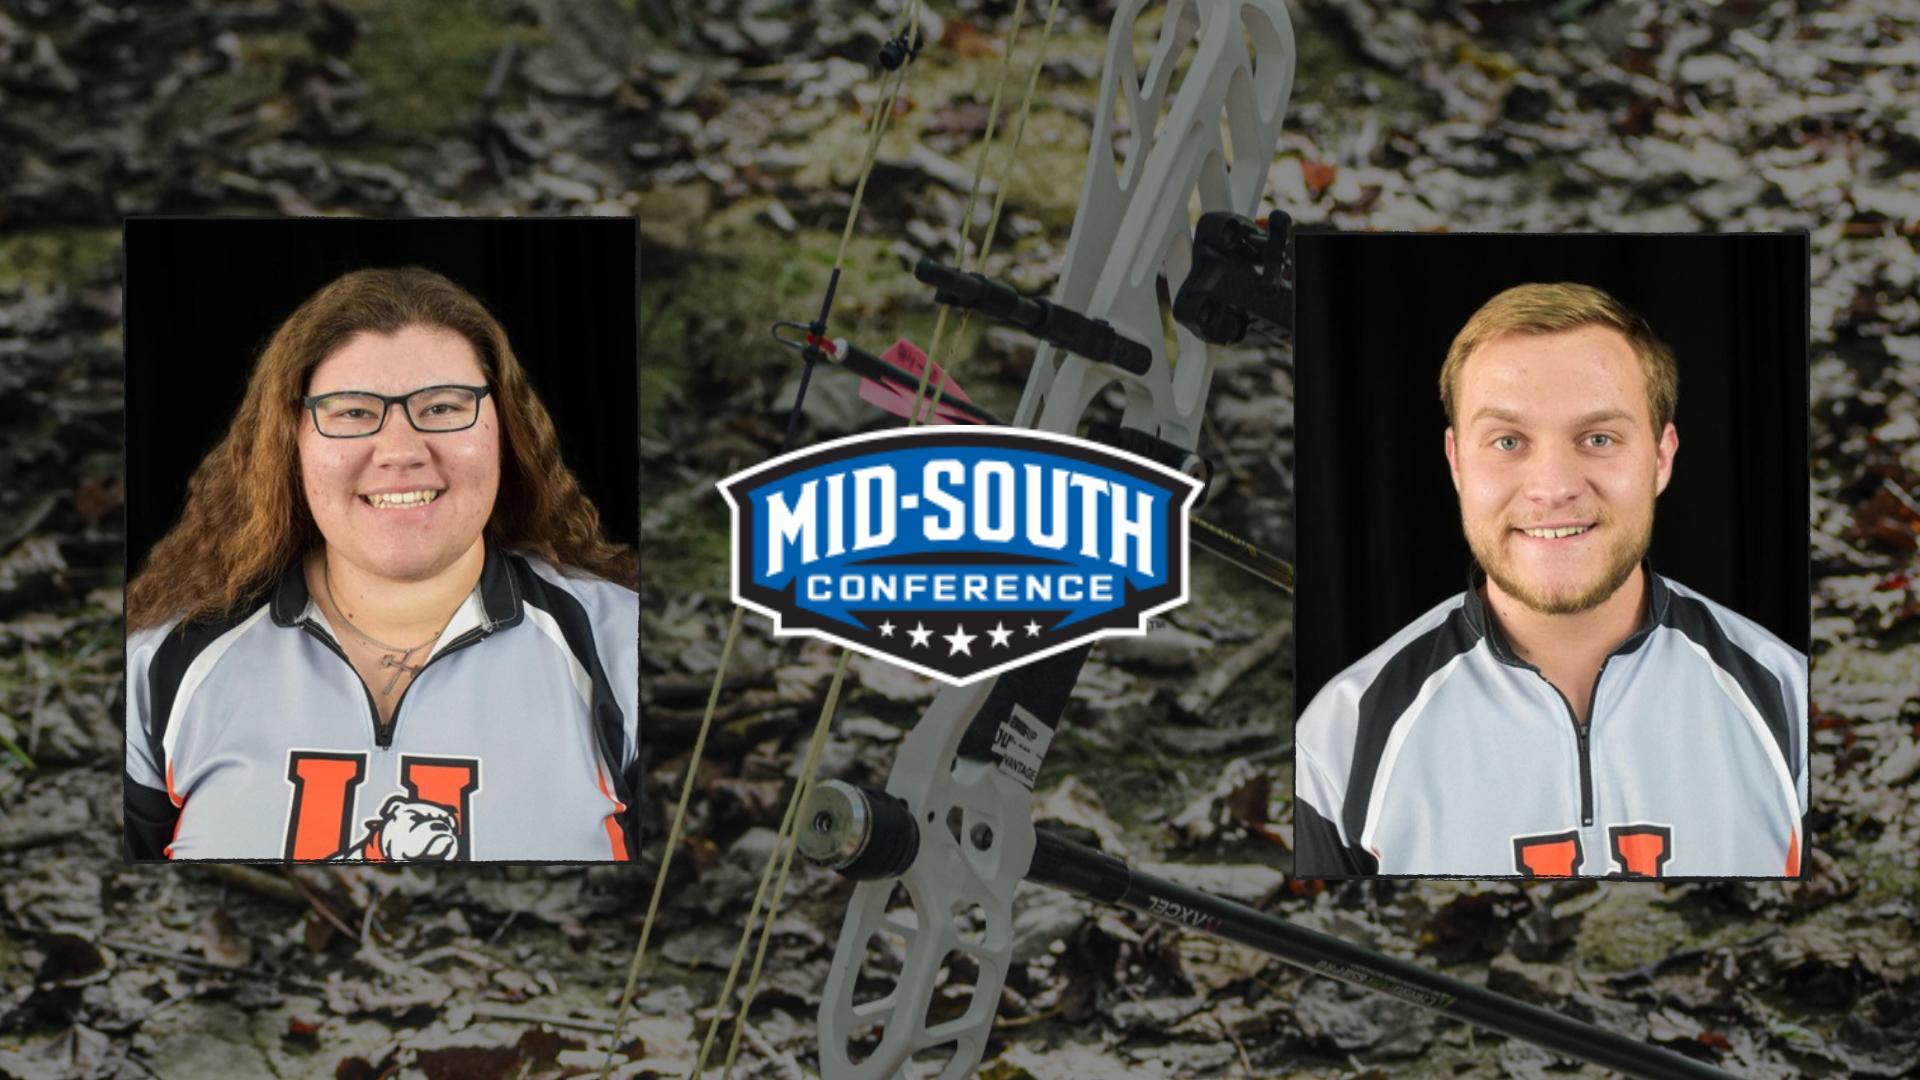 Rachel Flack and Evan Miller named to Mid-South Conference Champions of Character Team